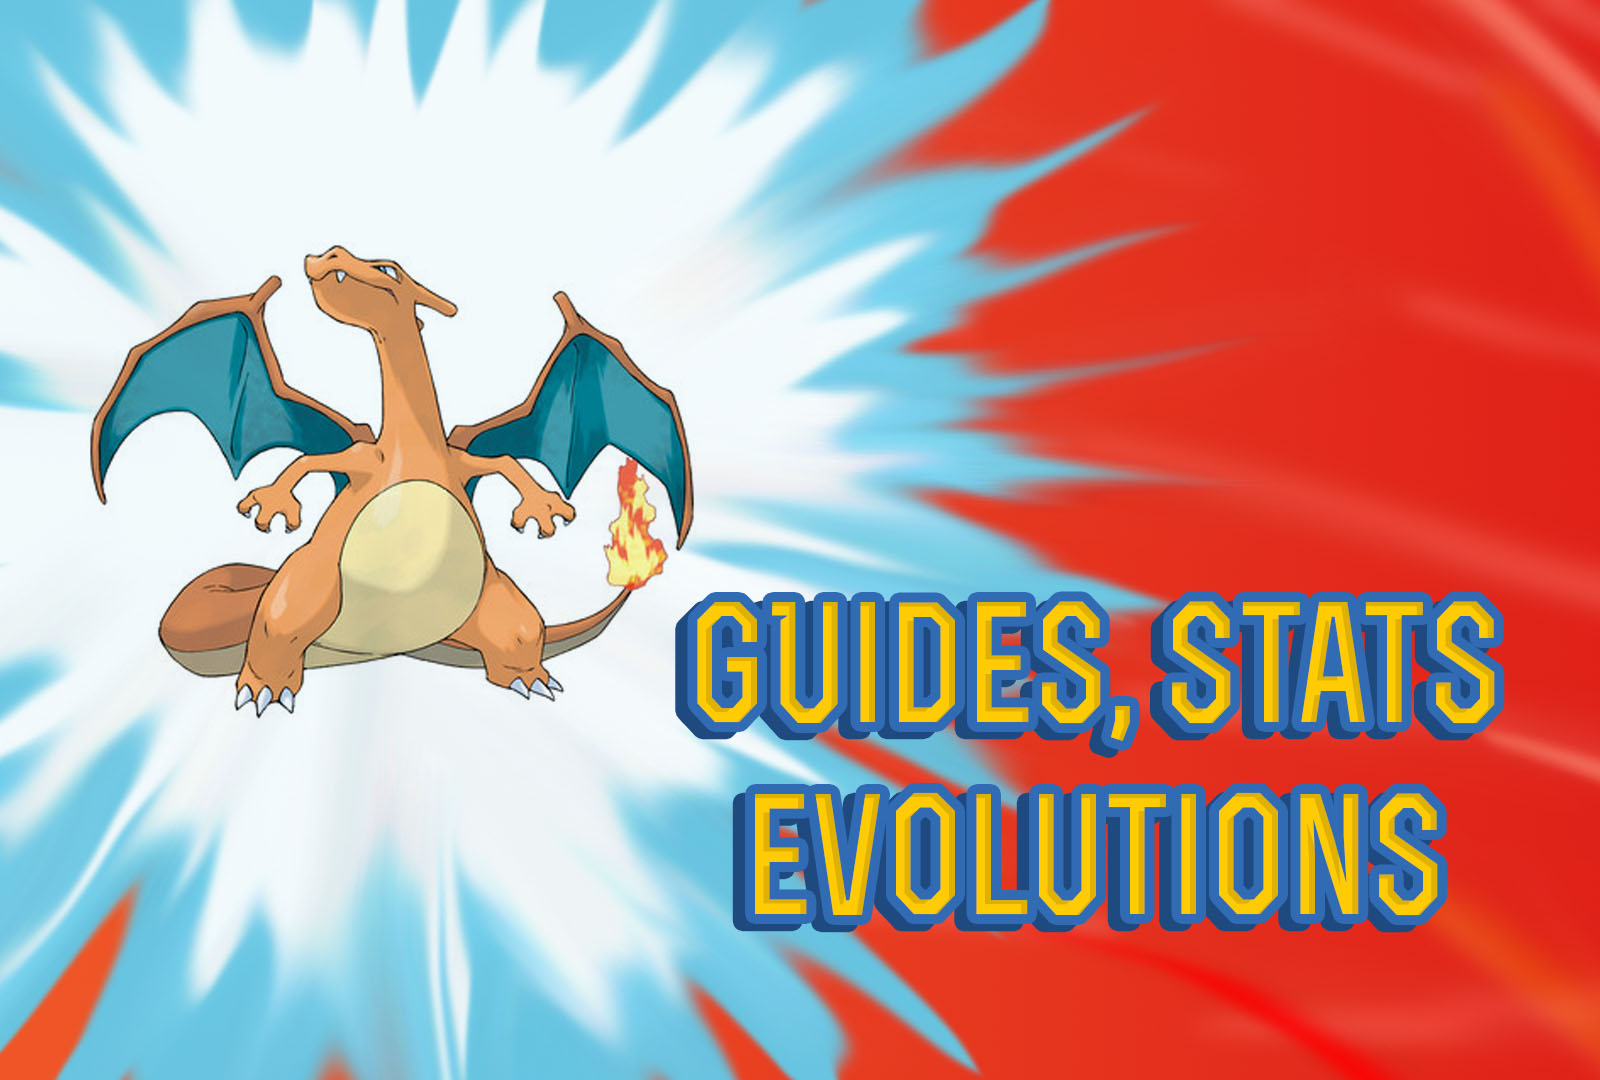 Pokemon Lets Go Charizard Guide, Stats, Evolutions and More